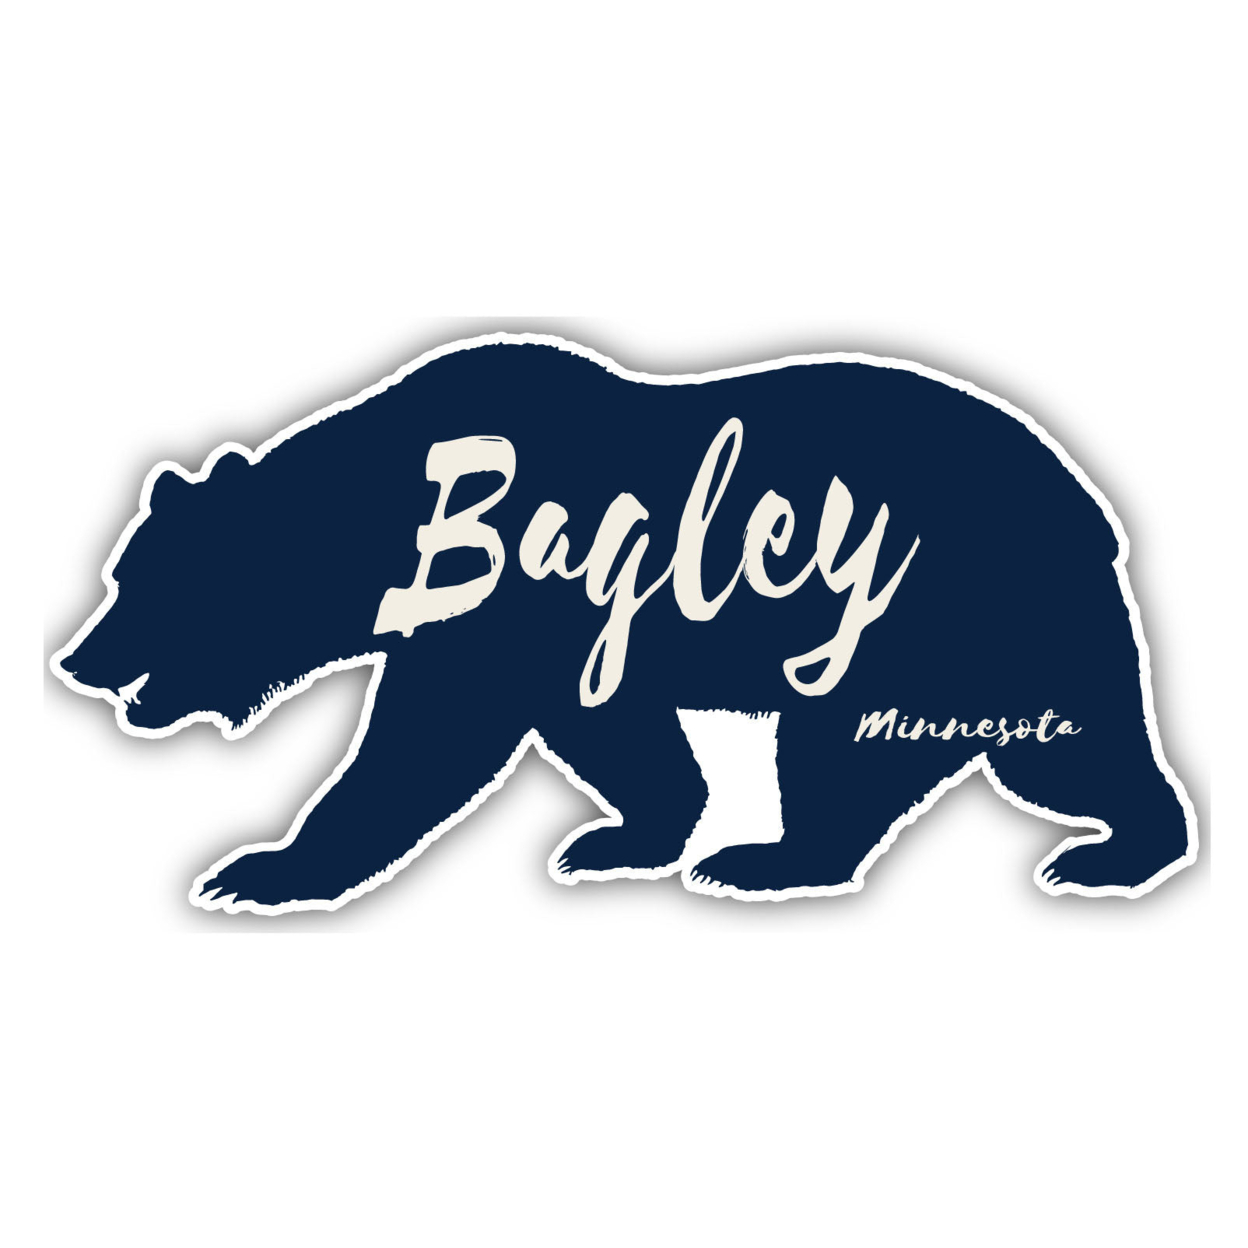 Bagley Minnesota Souvenir Decorative Stickers (Choose Theme And Size) - 4-Pack, 6-Inch, Bear